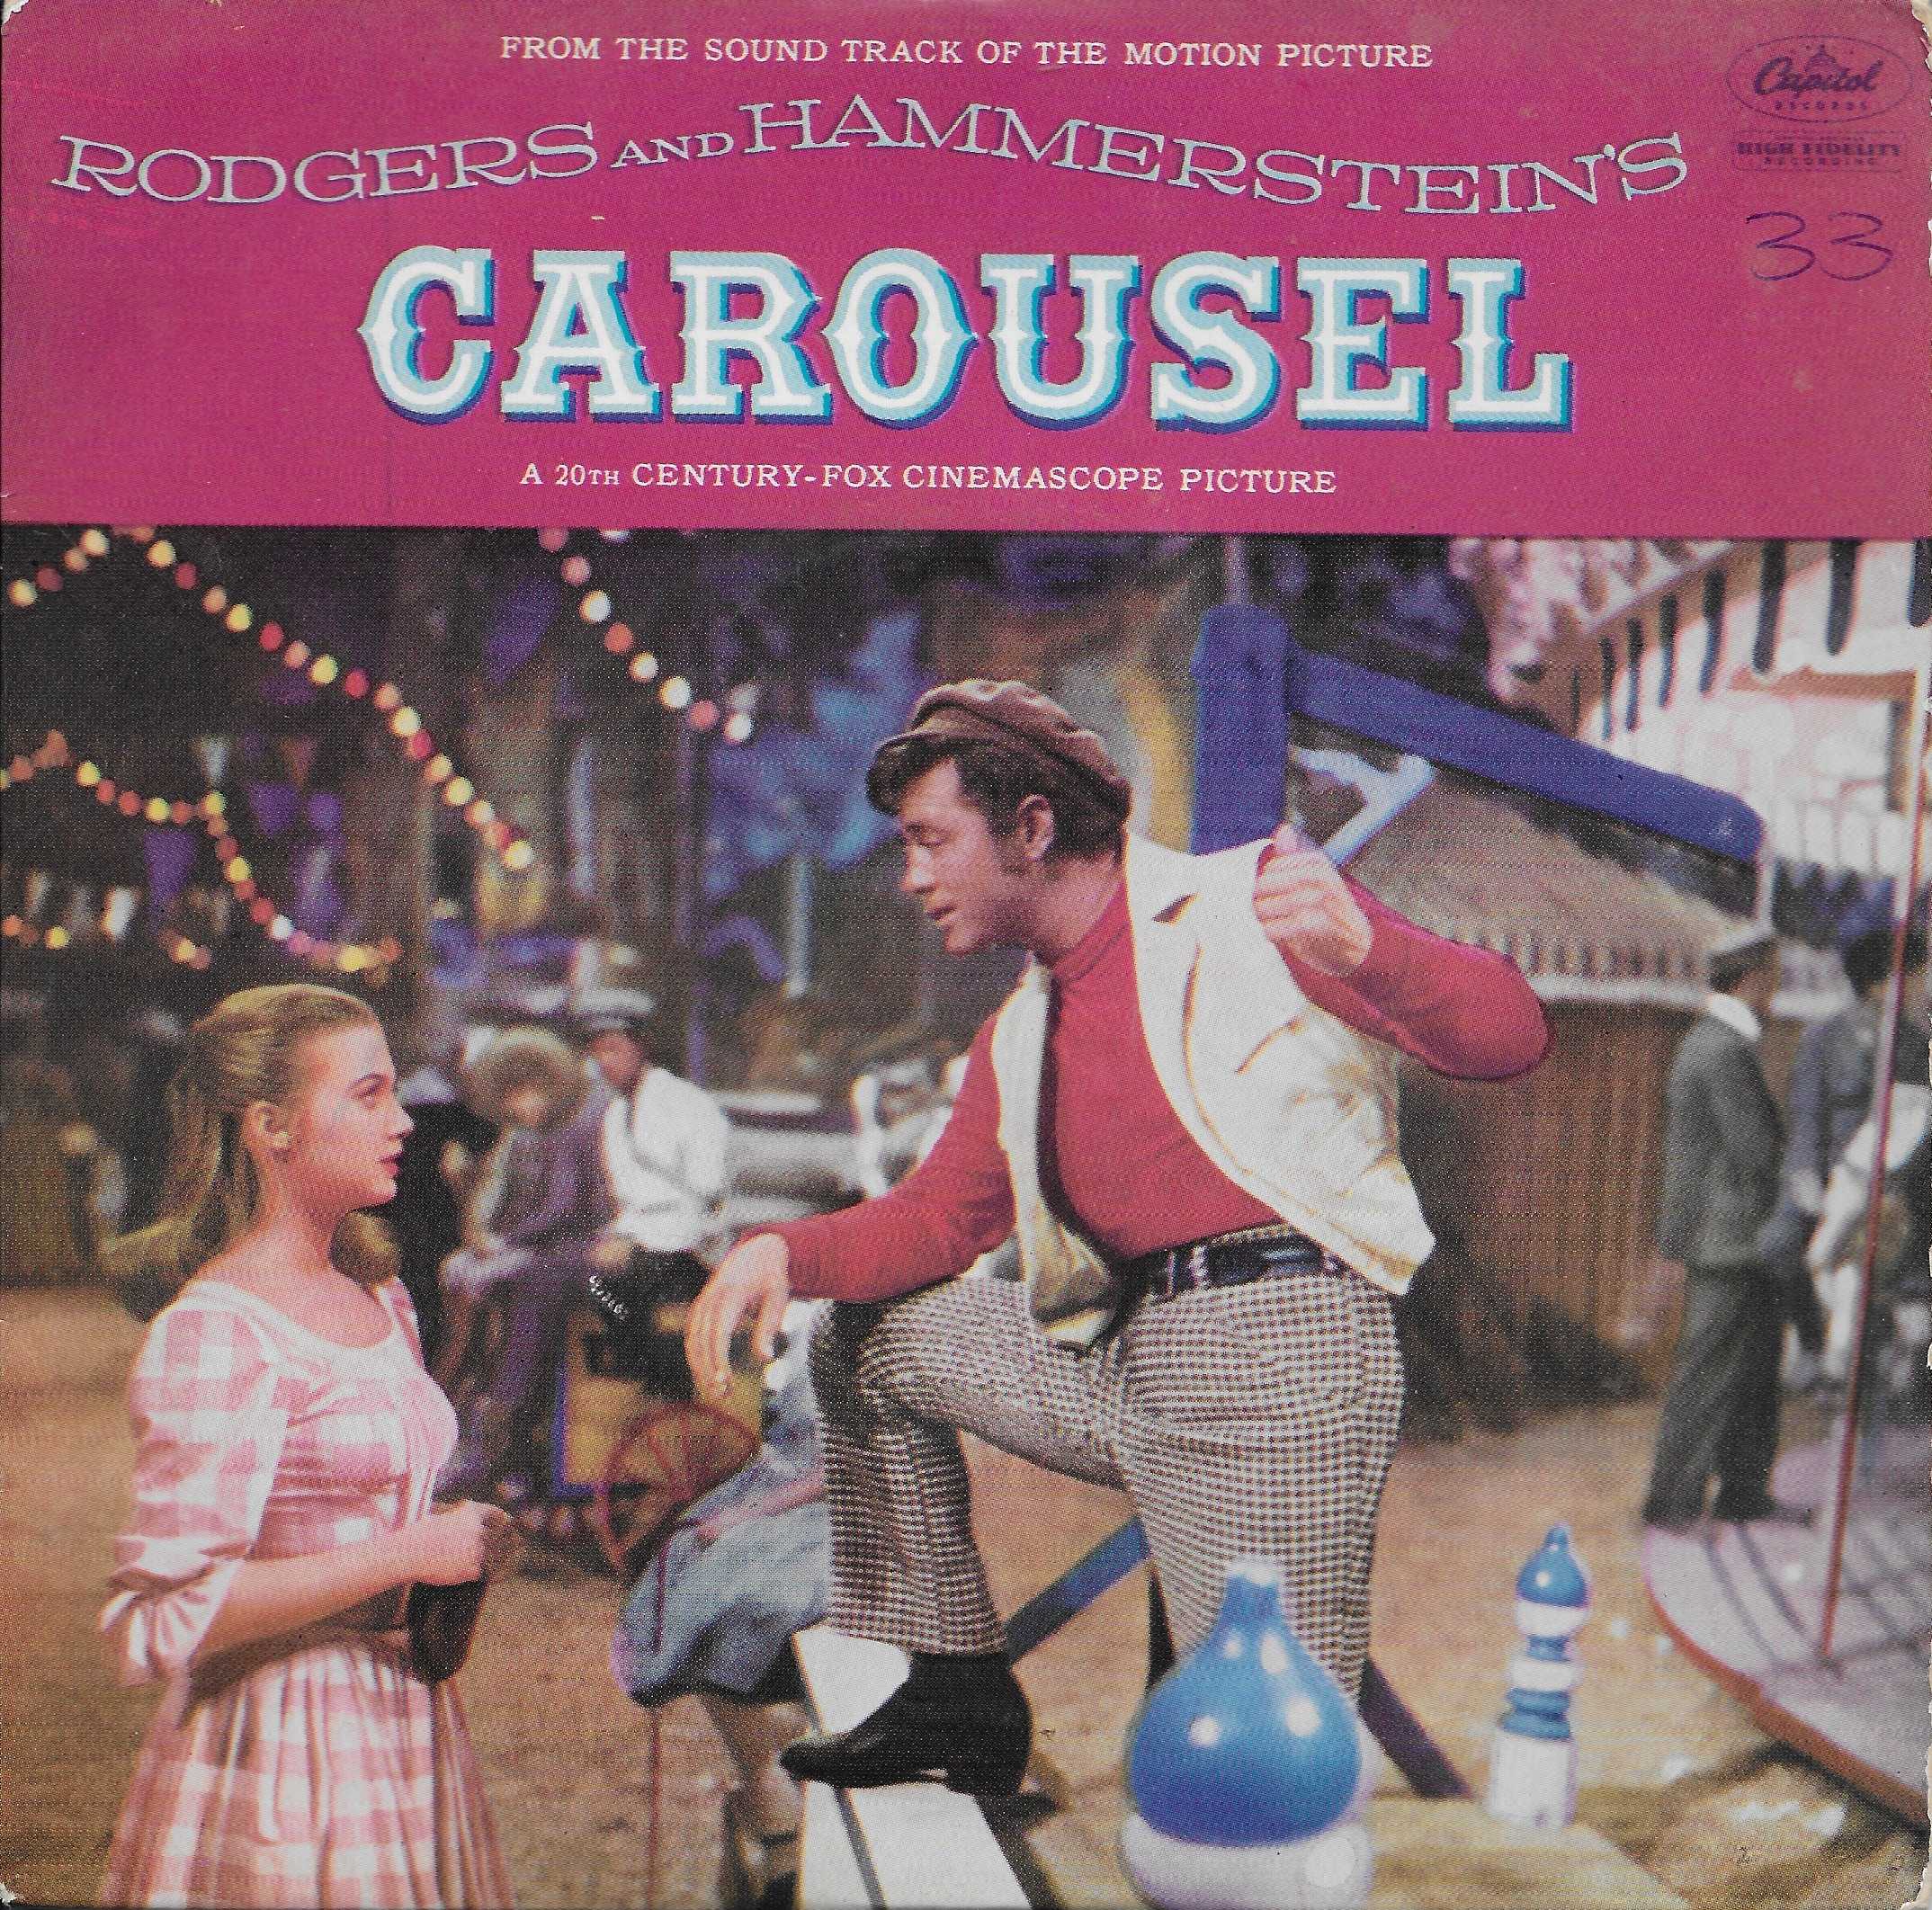 Picture of EAP 3-694 Carousel 3 by artist Rodgers / Hammerstein II from ITV, Channel 4 and Channel 5 singles library